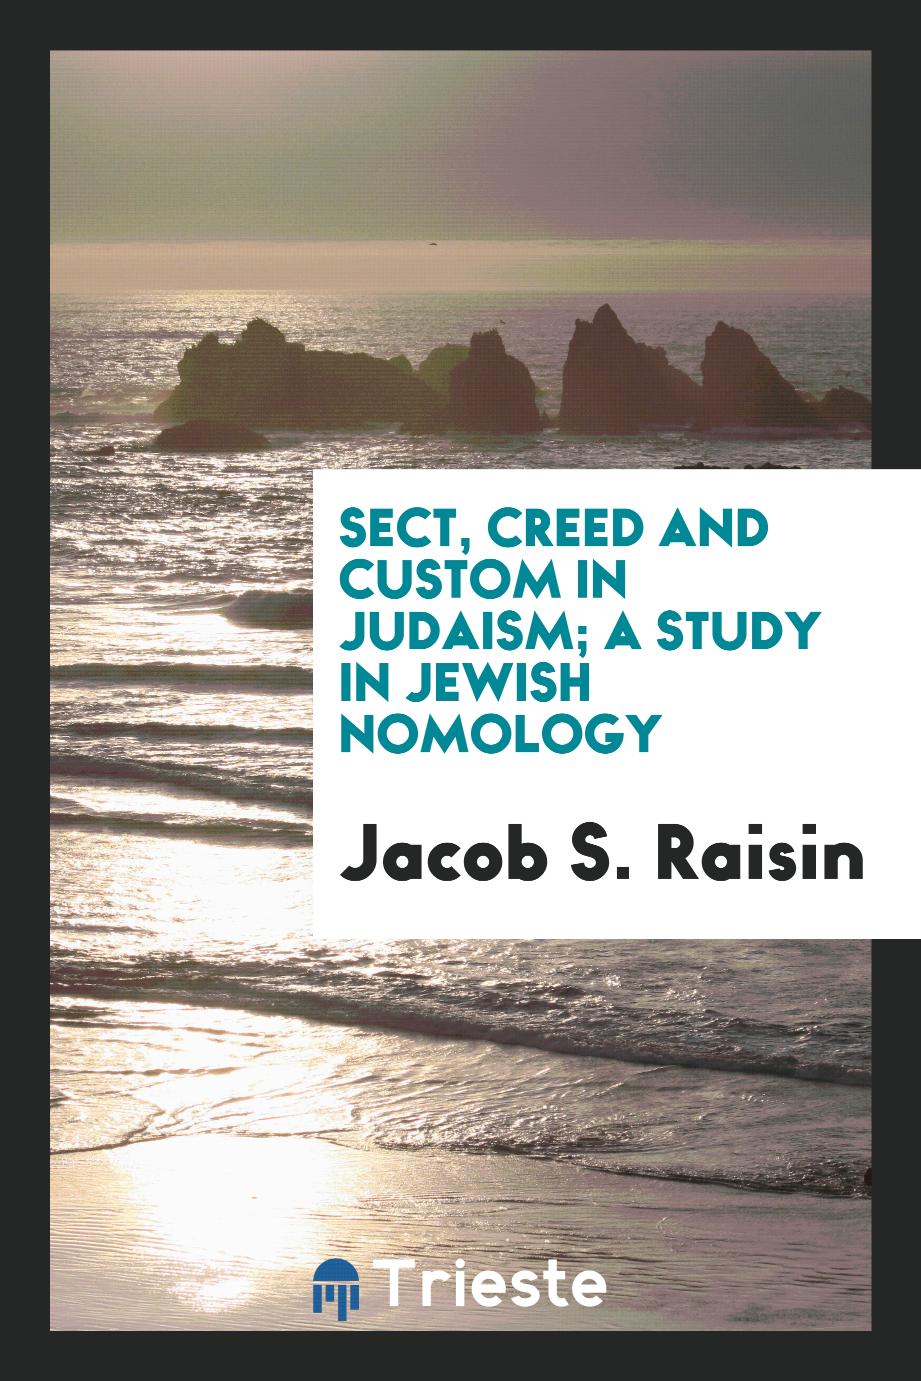 Sect, creed and custom in Judaism; a study in Jewish nomology